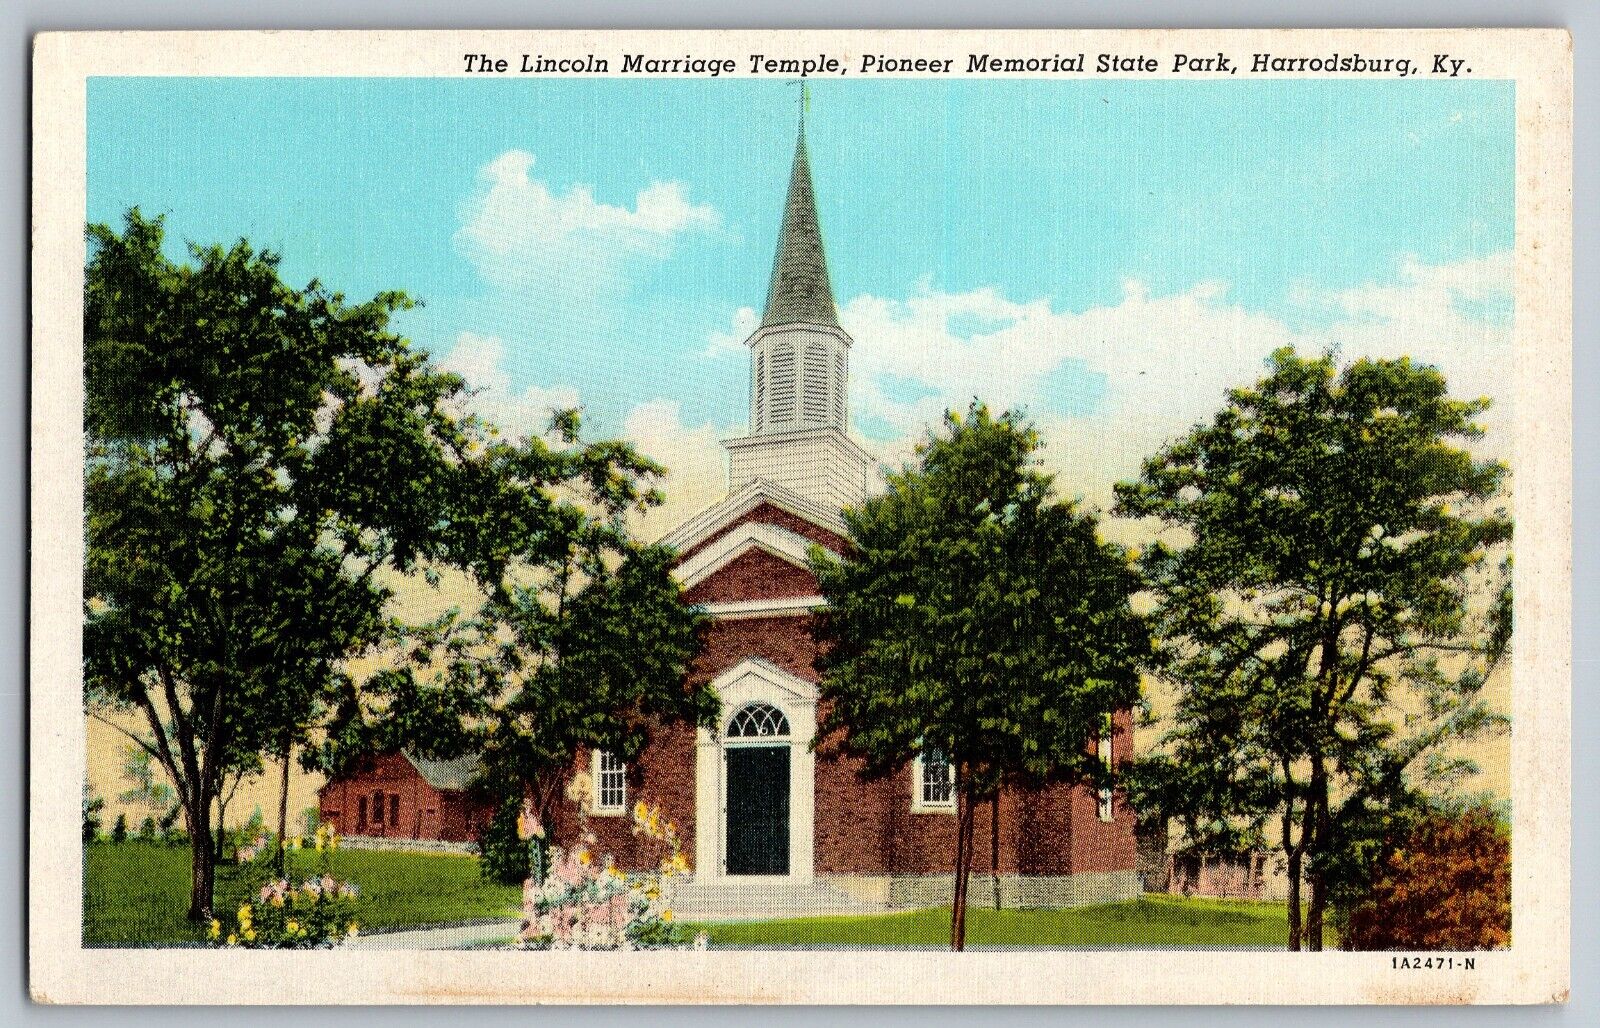 Harrodsburg, Kentucky KY - The Lincoln Marriage Temple - Vintage Postcard